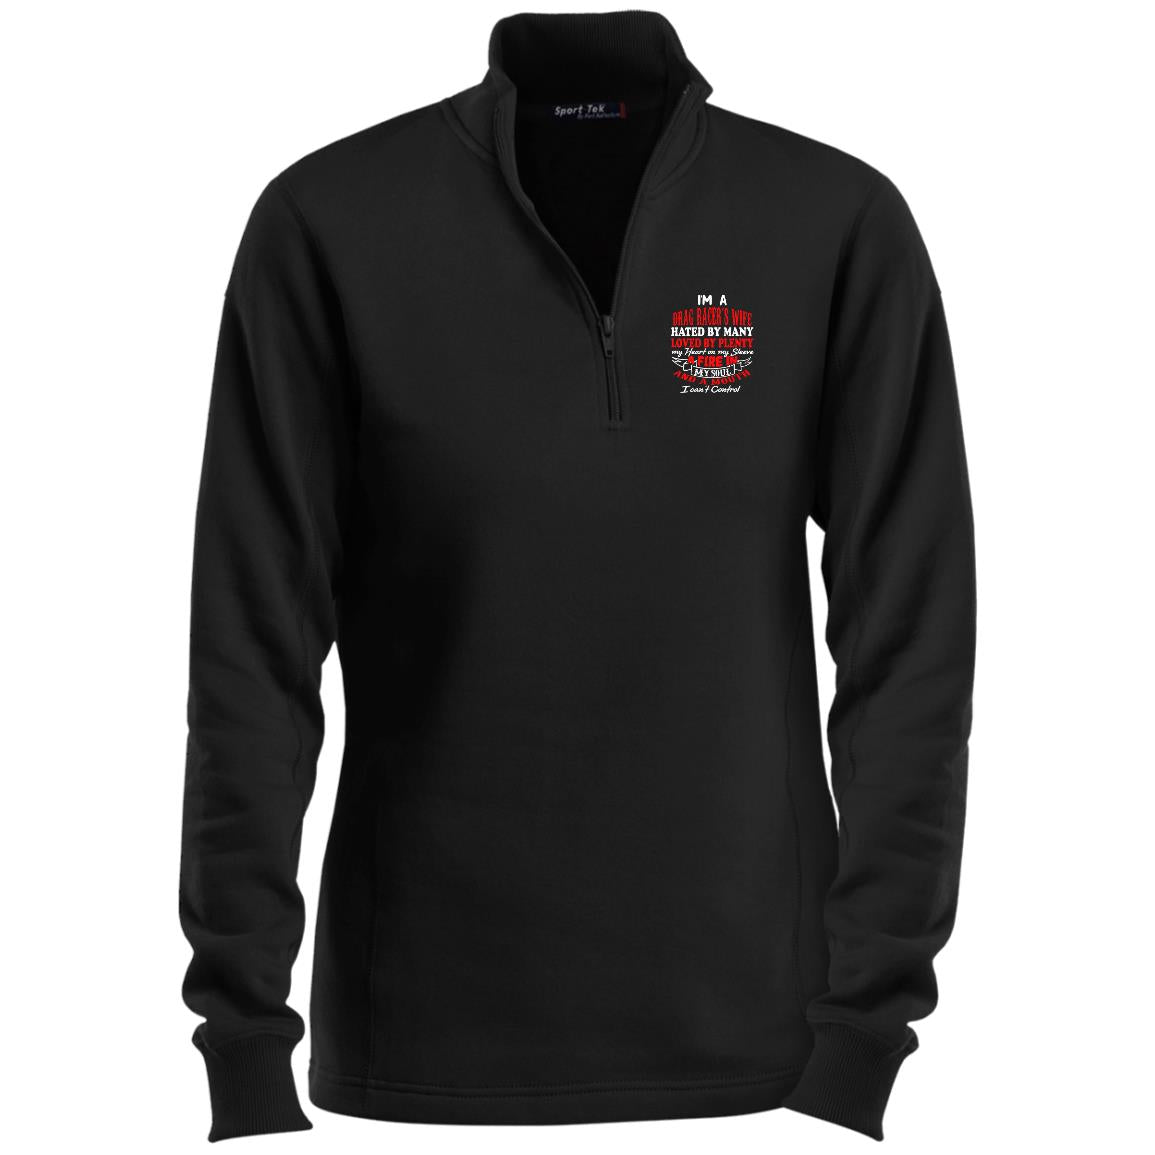 I'm A Drag Racer's Wife Hated By Many Loved By Plenty Ladies 1/4 Zip Sweatshirt